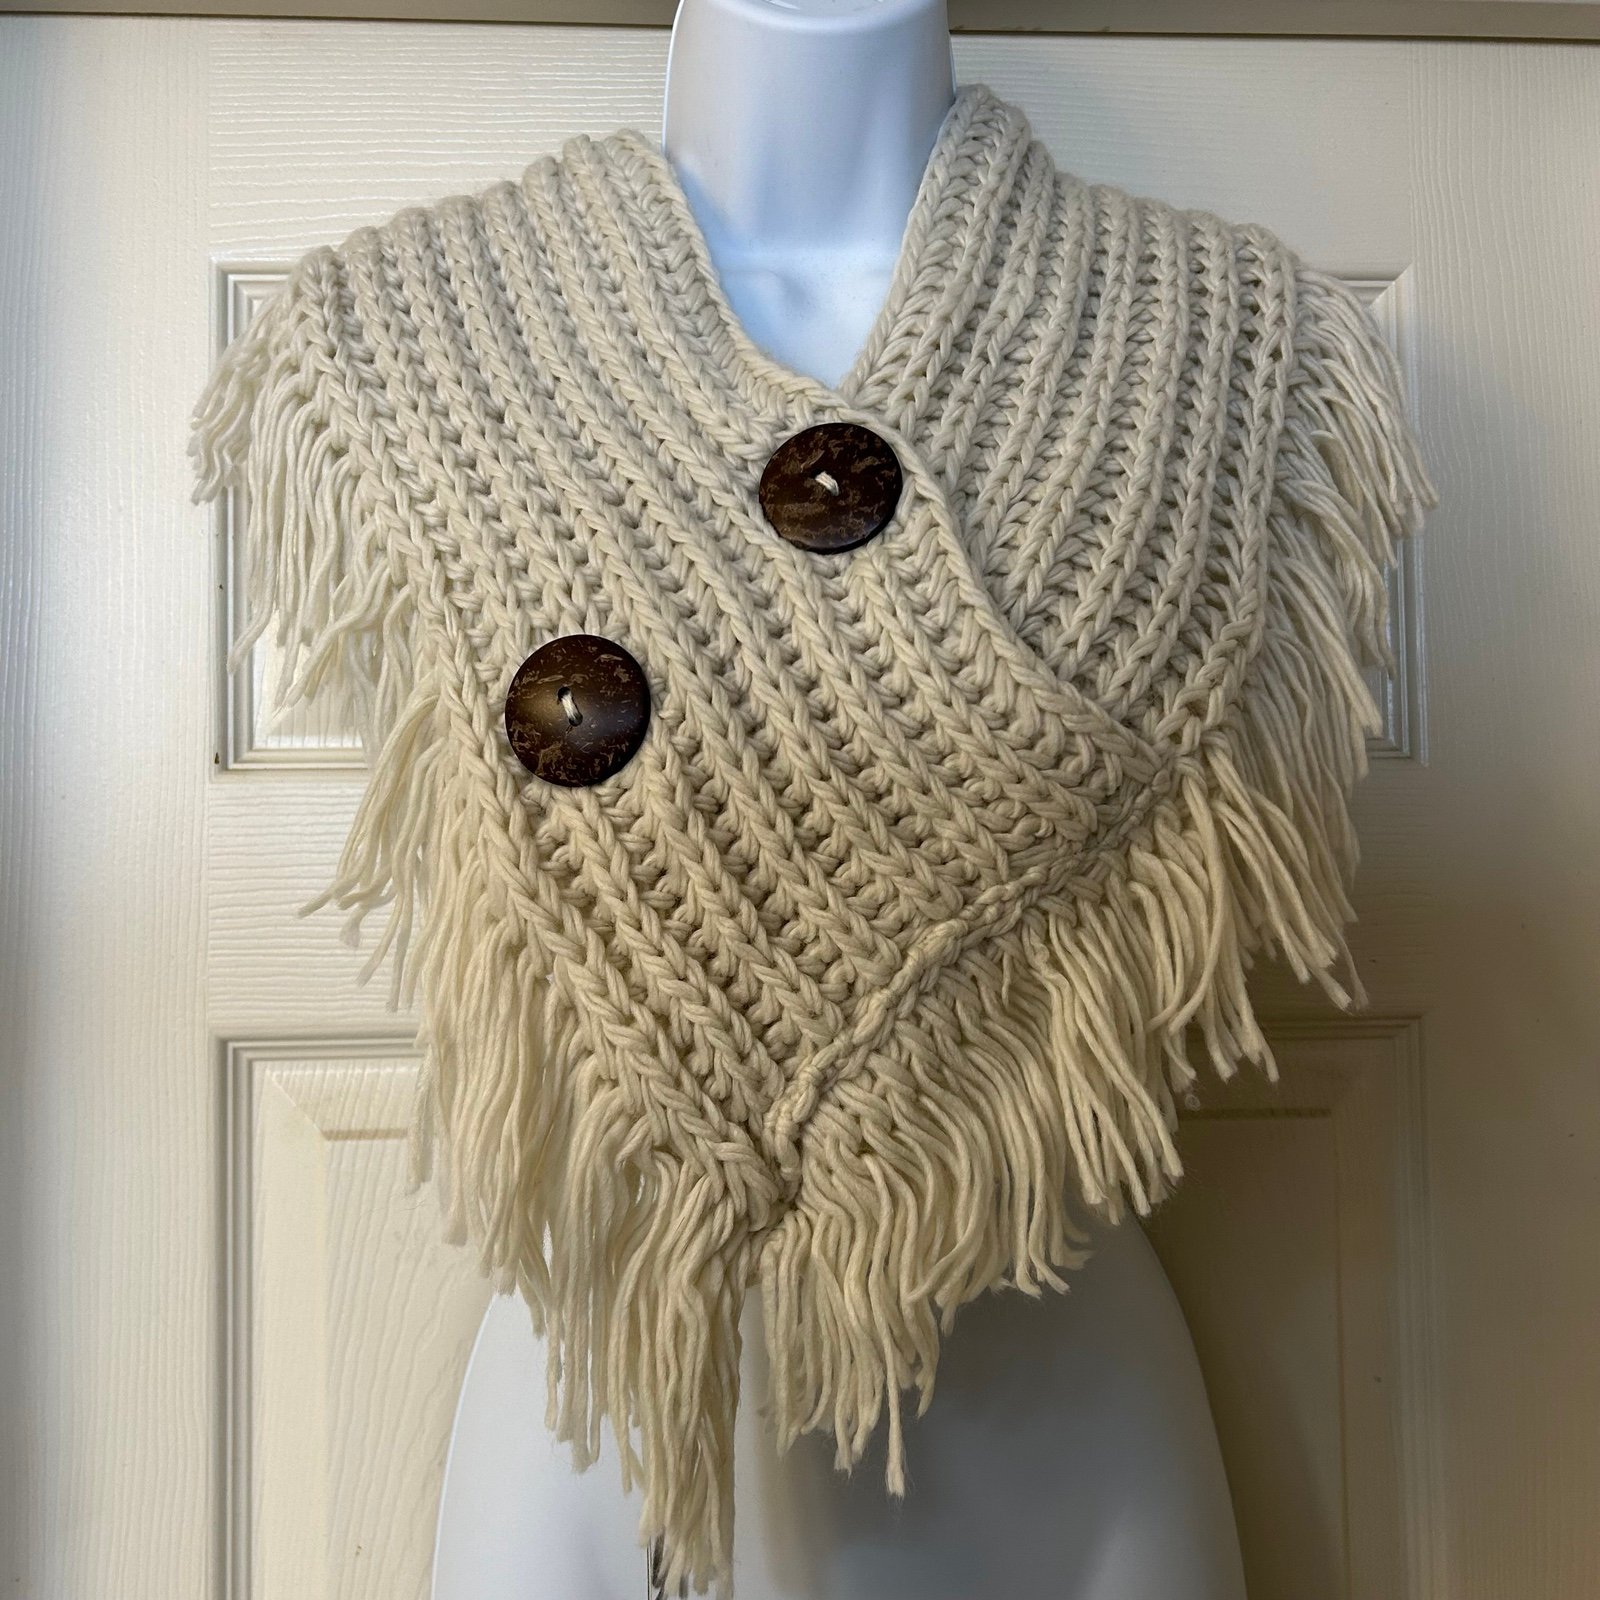 save up to 70% Ivory Tassel Shawl with Button accents H